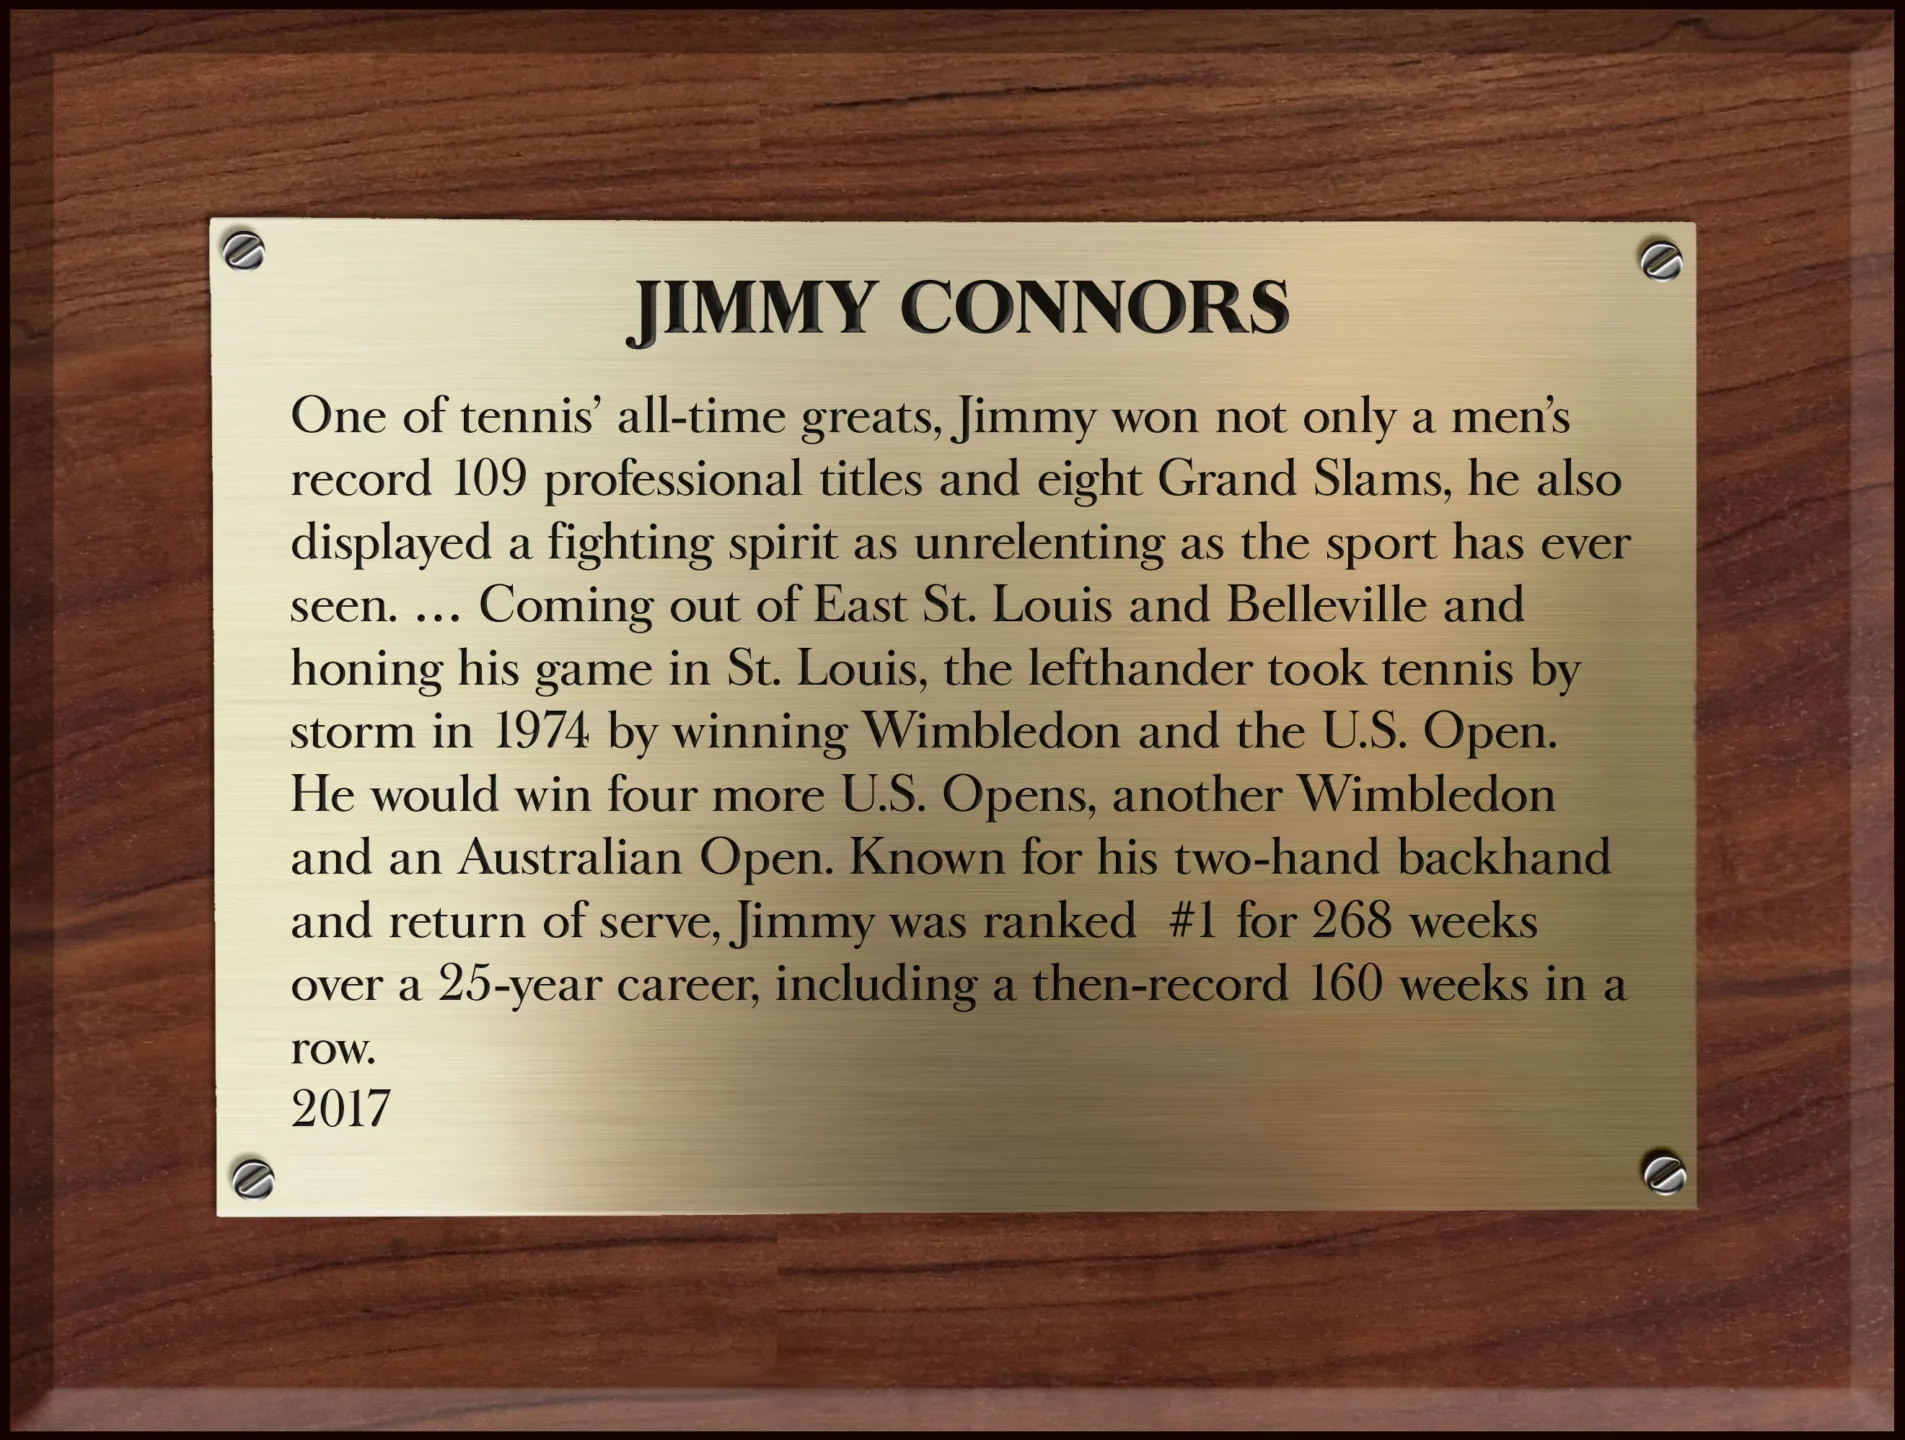 Plaque copy: JiMMY CONNORS

One of tennis’ all-time greats, Jimmy won not only a men’s record 109 professional titles and eight Grand Slams, he also displayed a fighting spirit as unrelenting as the sport has ever seen. … Coming out of East St. Louis and Belleville and honing his game in St. Louis, the lefthander took tennis by storm in 1974 by winning Wimbledon and the U.S. Open. He would win four more U.S. Opens, another Wimbledon and an Australian Open. Known for his two-hand backhand and return of serve, Jimmy was ranked No. 1 for 268 weeks over a 25-year career, including a then-record 160 weeks in a row.